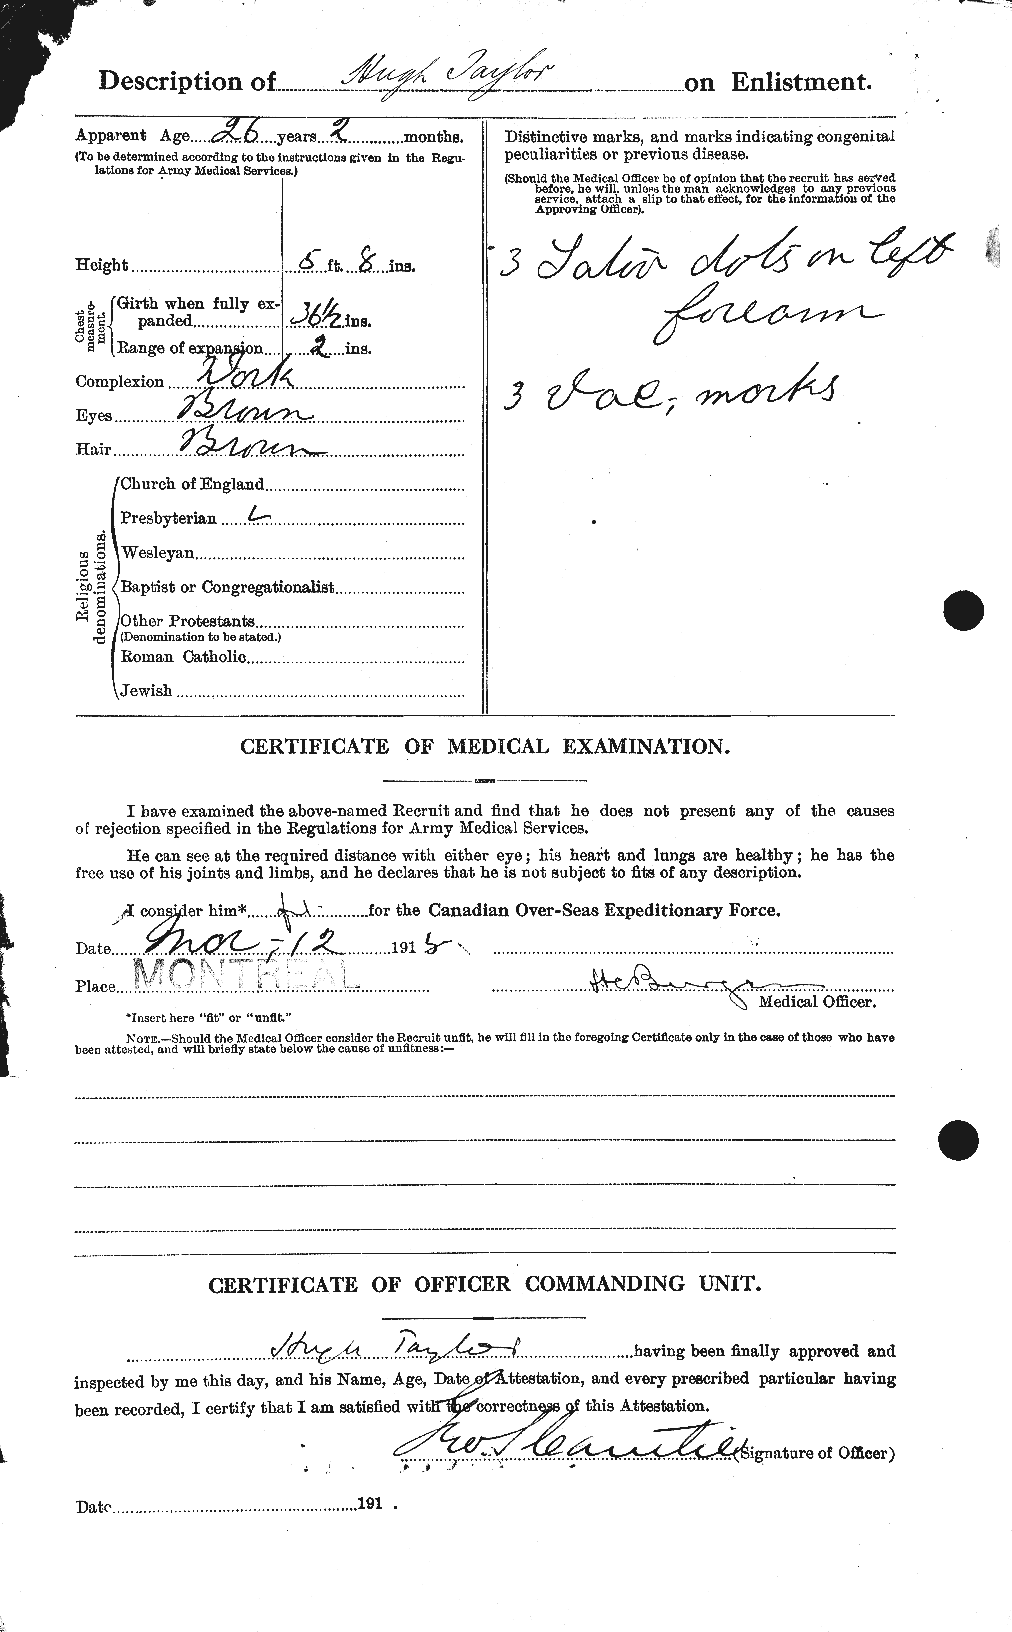 Personnel Records of the First World War - CEF 626611b